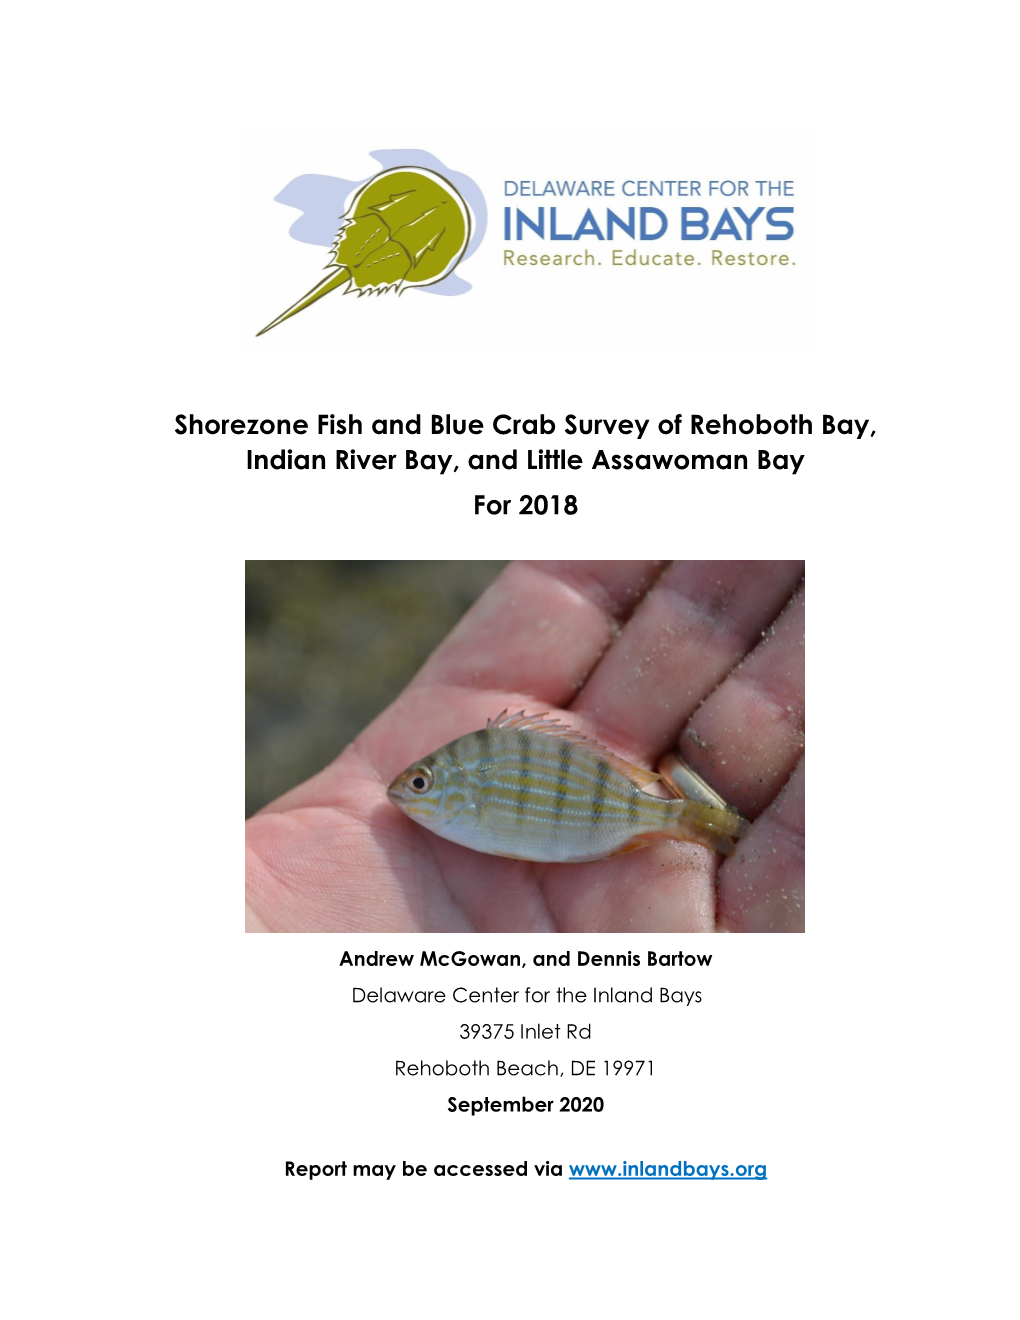 Shorezone Fish and Blue Crab Survey of Rehoboth Bay, Indian River Bay, and Little Assawoman Bay for 2018